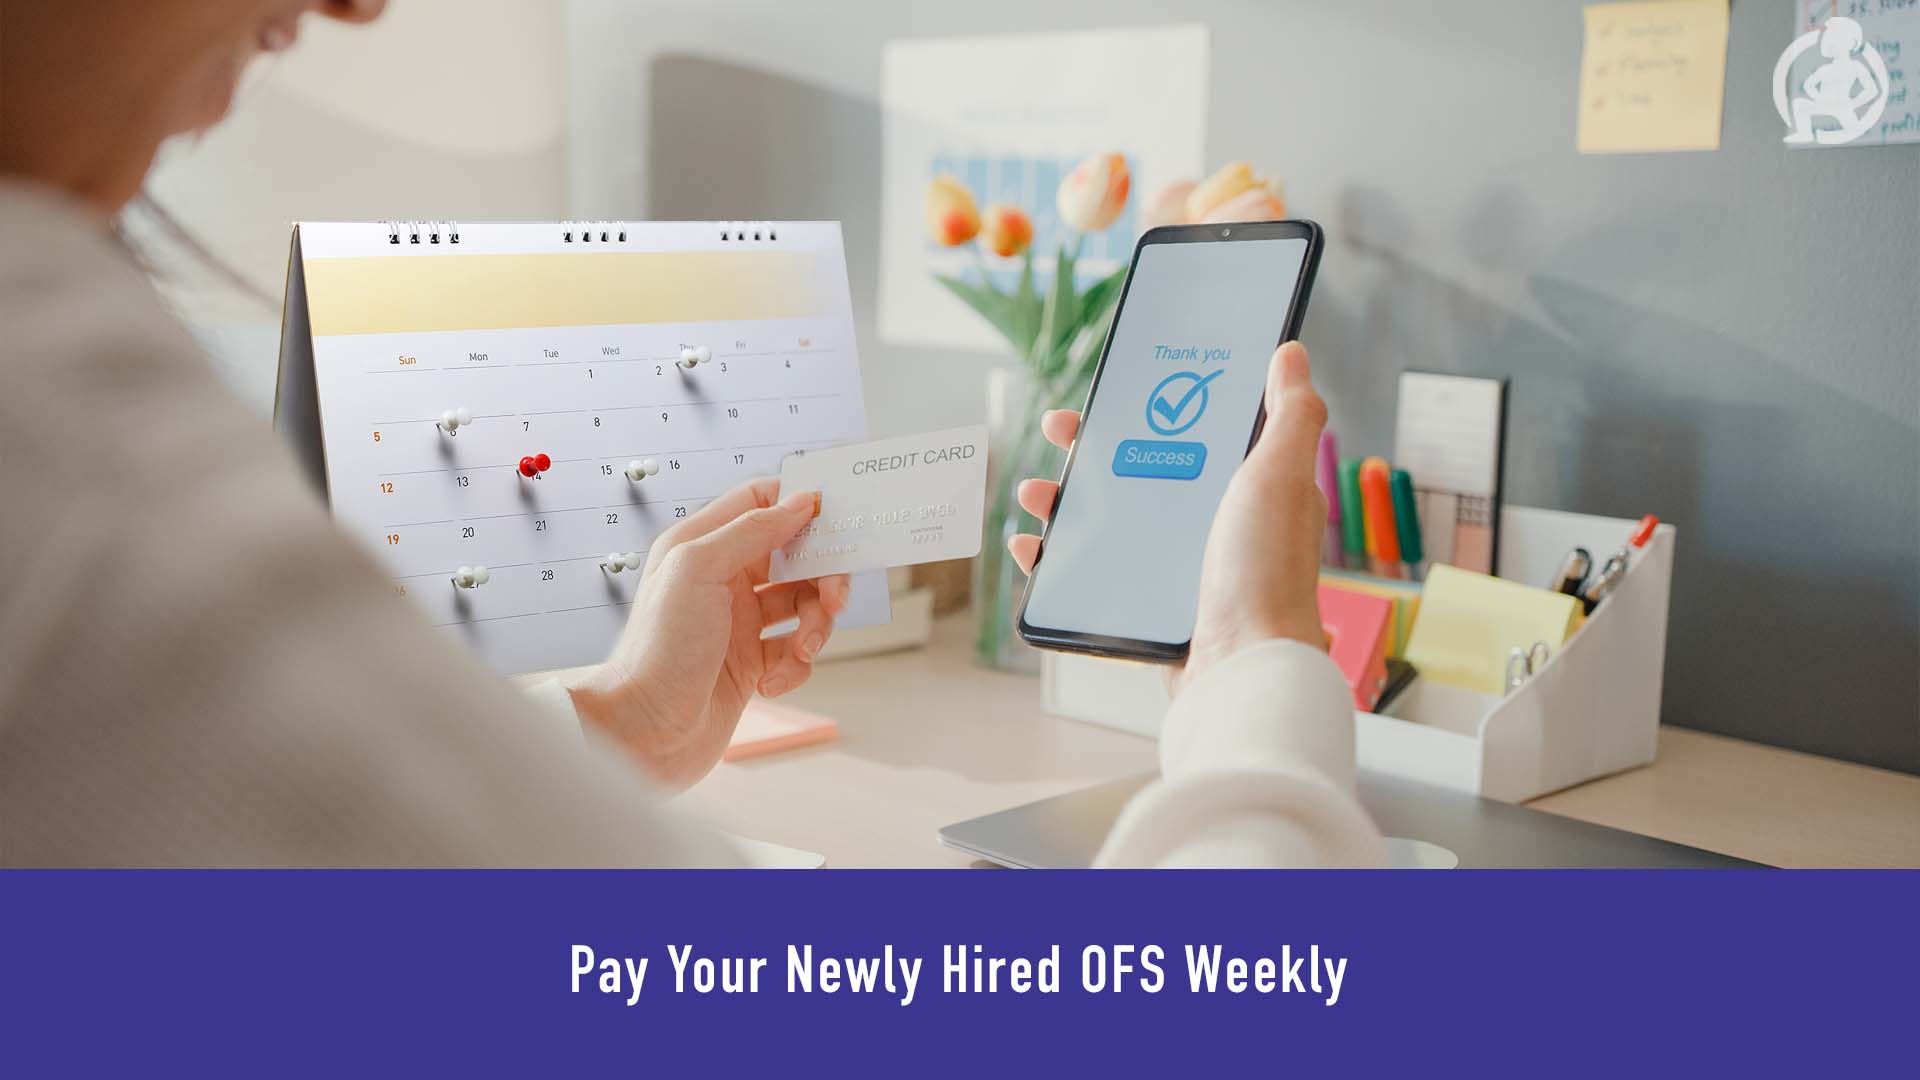 Pay Your Newly Hired OFS Weekly – Practical Advice